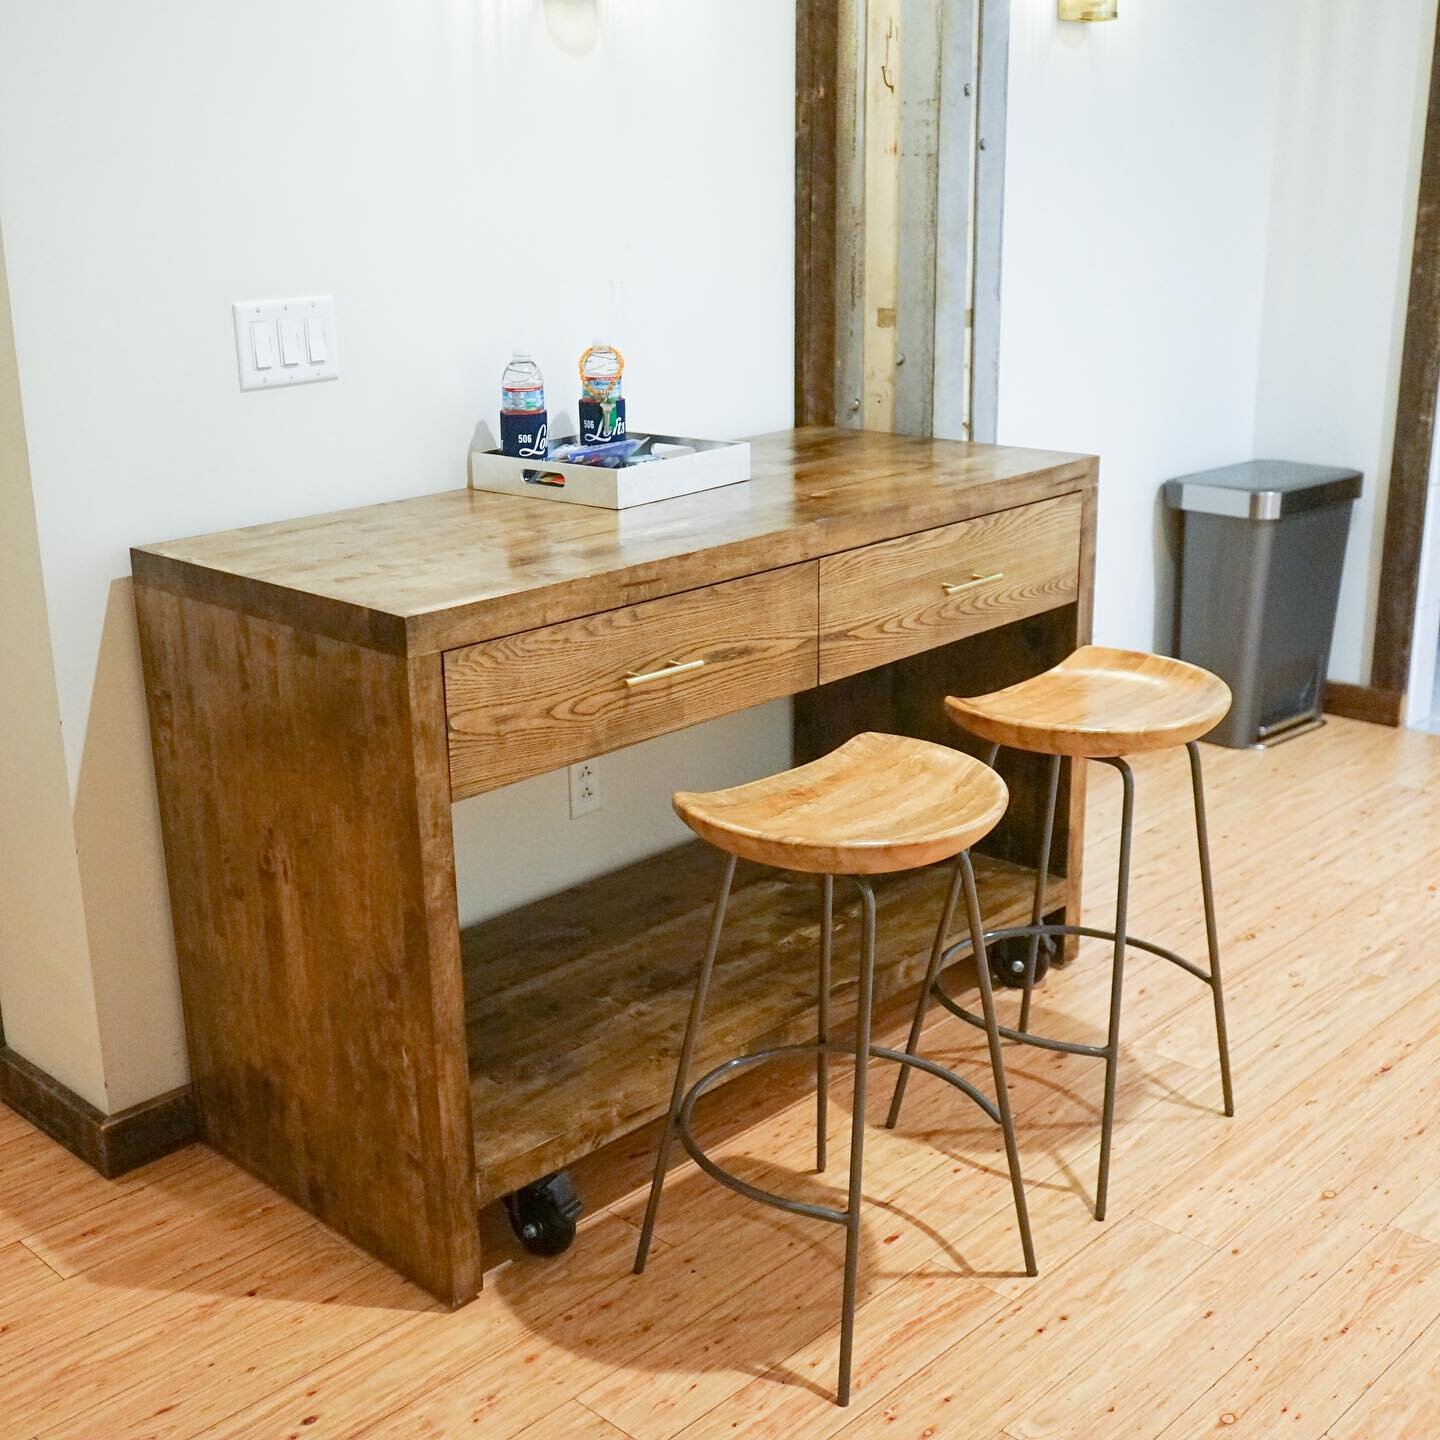 We were able to design and build this kitchen island for @506lofts and are really proud of how it turned out!  #EmployTrainMentor #CustomWoodworking #Nashville #KitchenIsland